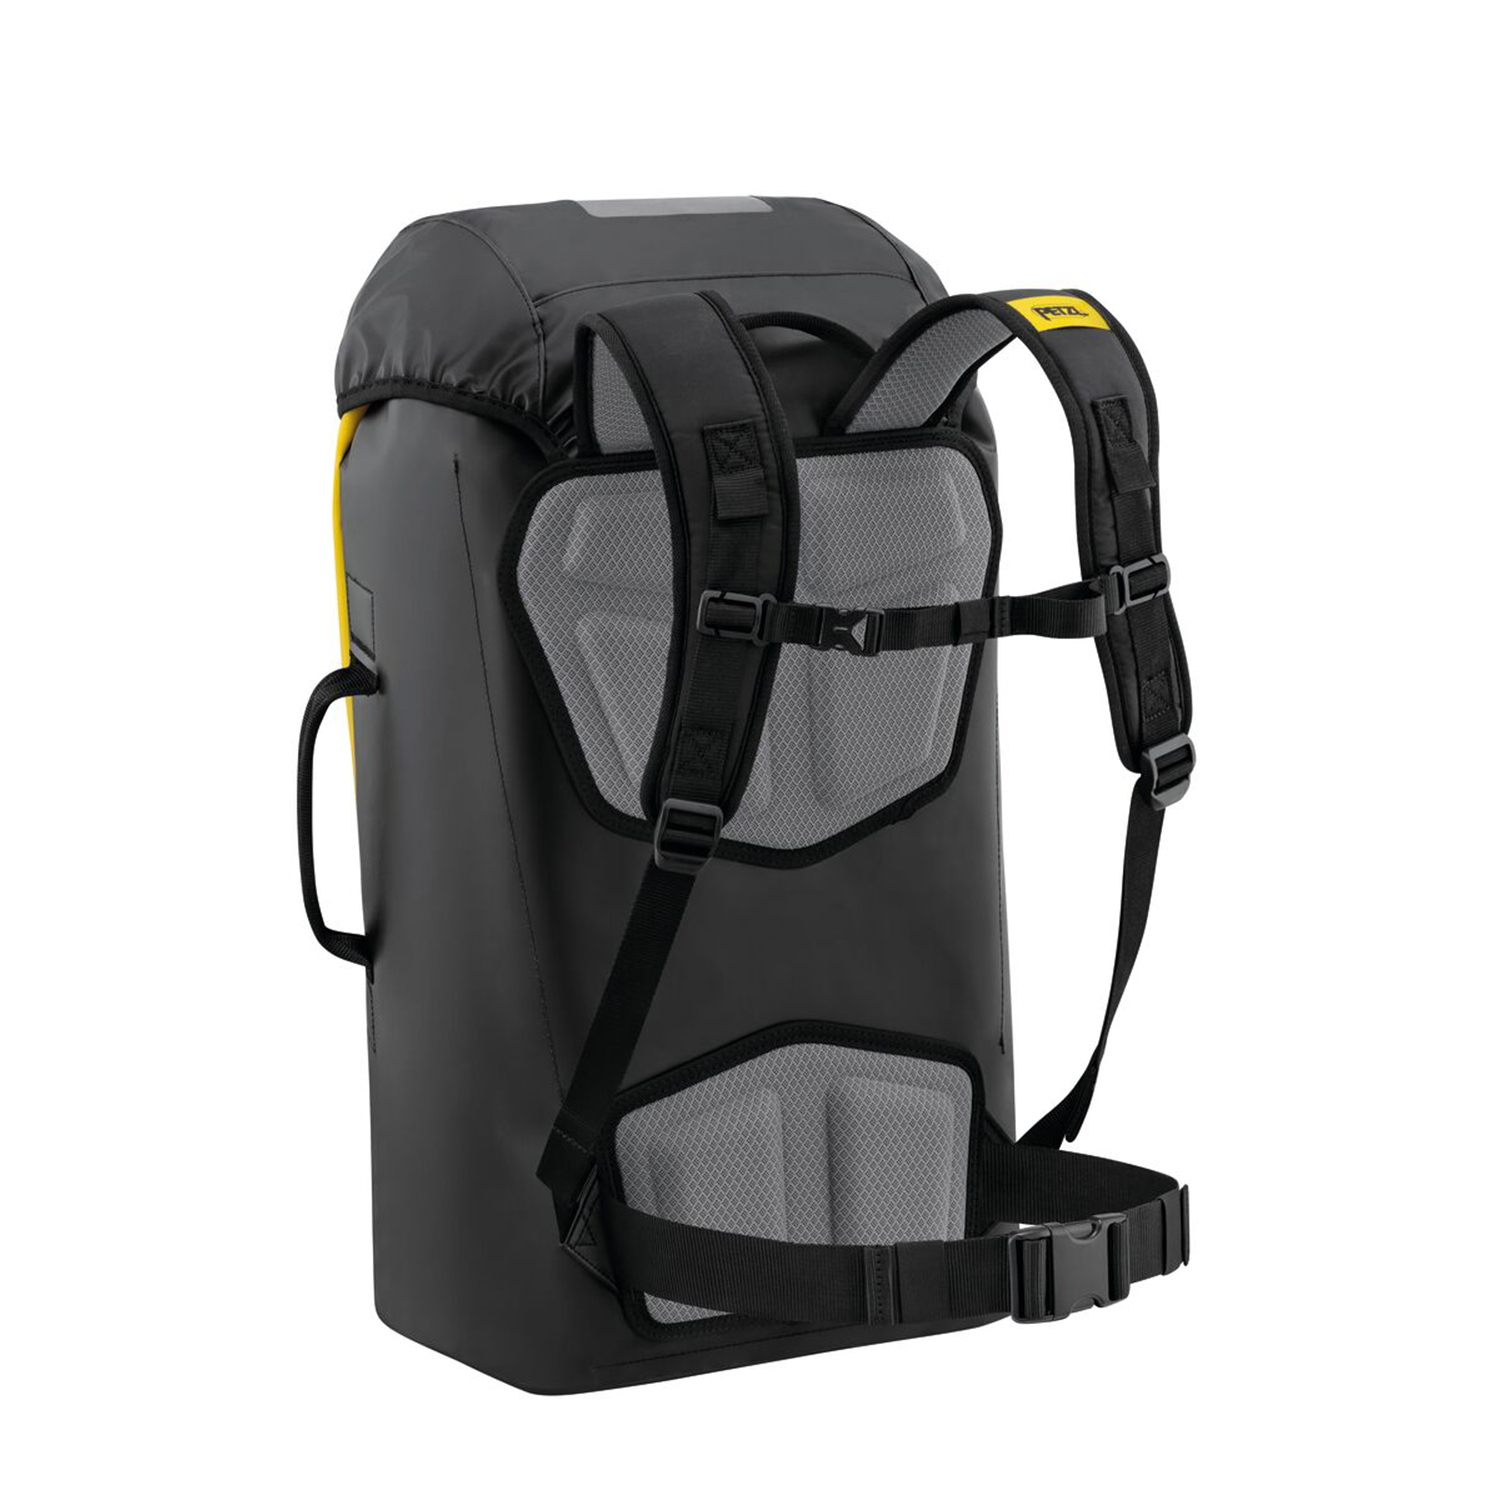 Petzl TRANSPORT Pack Bag - 45 Liter from GME Supply